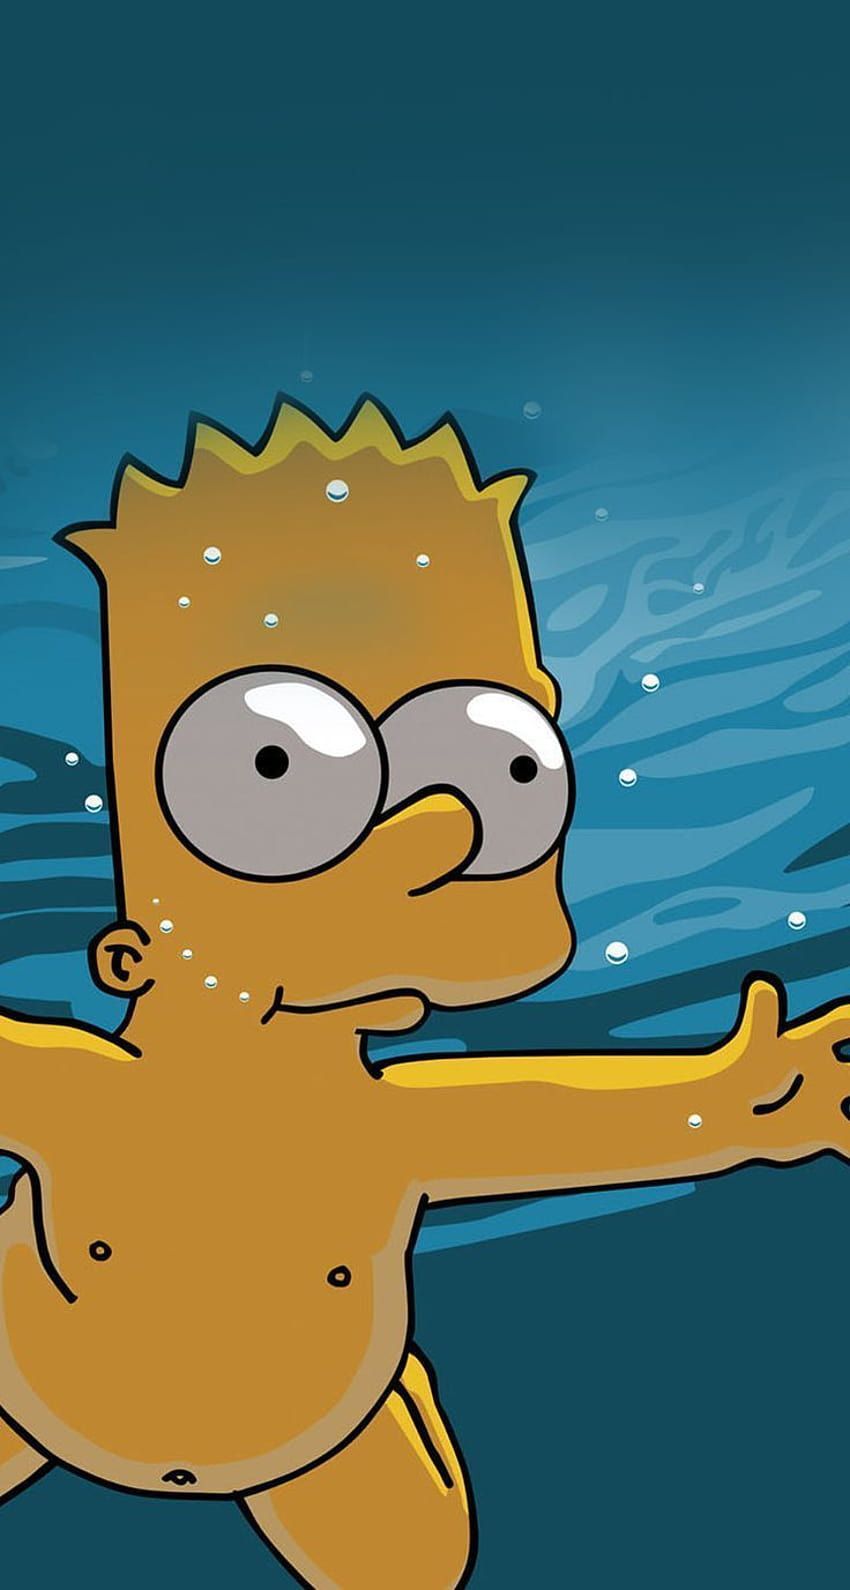 Bart Simpson in the water wallpaper - Bart Simpson